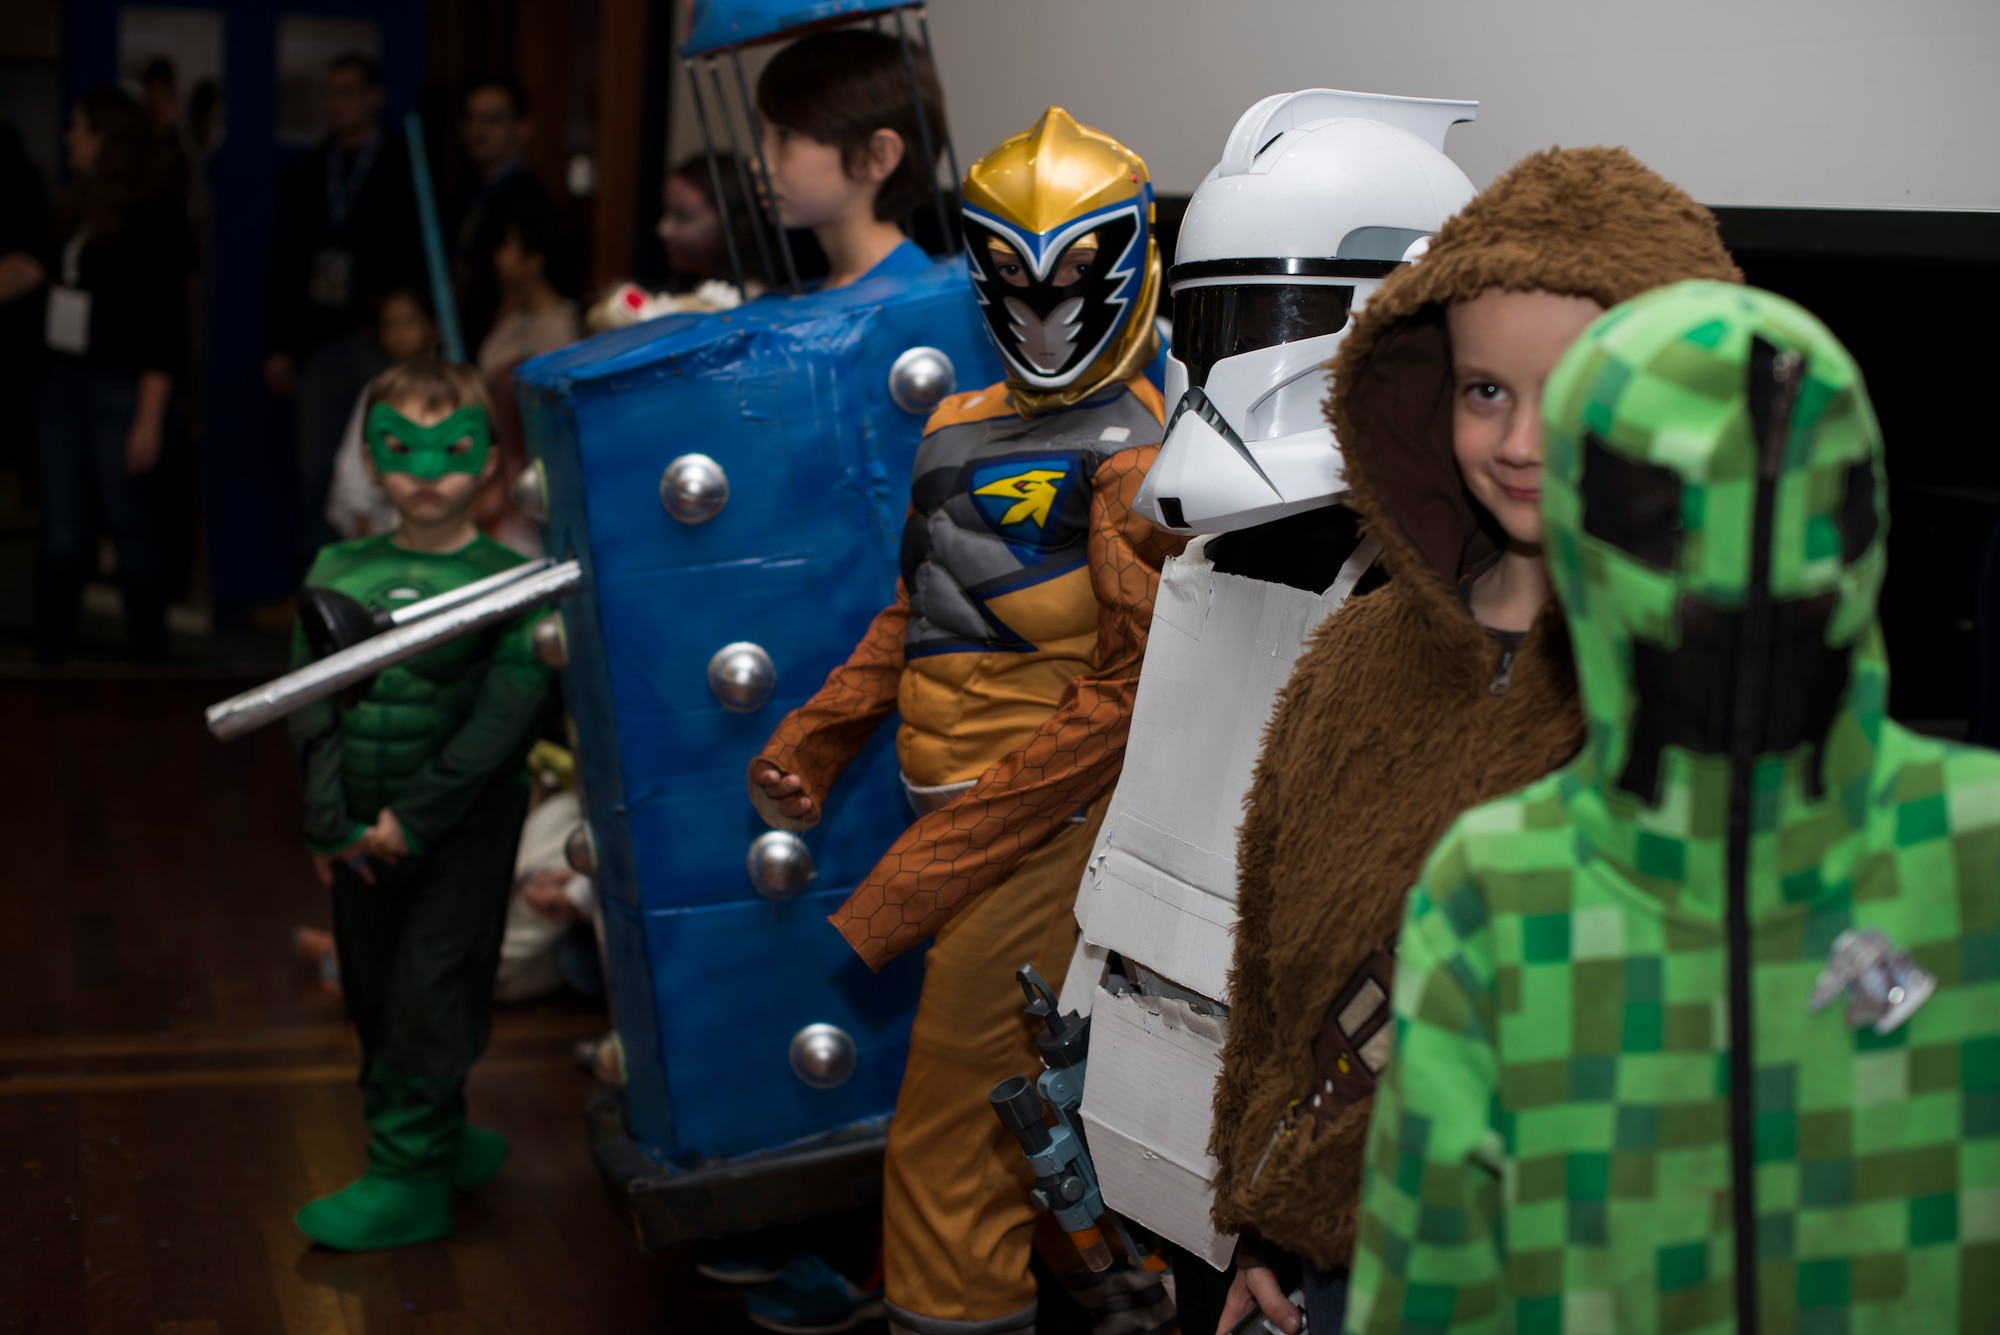 Children participate in a costume contest during Operation Sci-Fi Con at Spangdahlem Air Base, Germany, Nov. 23, 2015. During the event, families dressed as their favorite science fiction characters. (U.S. Air Force photo by Staff Sgt. Christopher Ruano/Released)